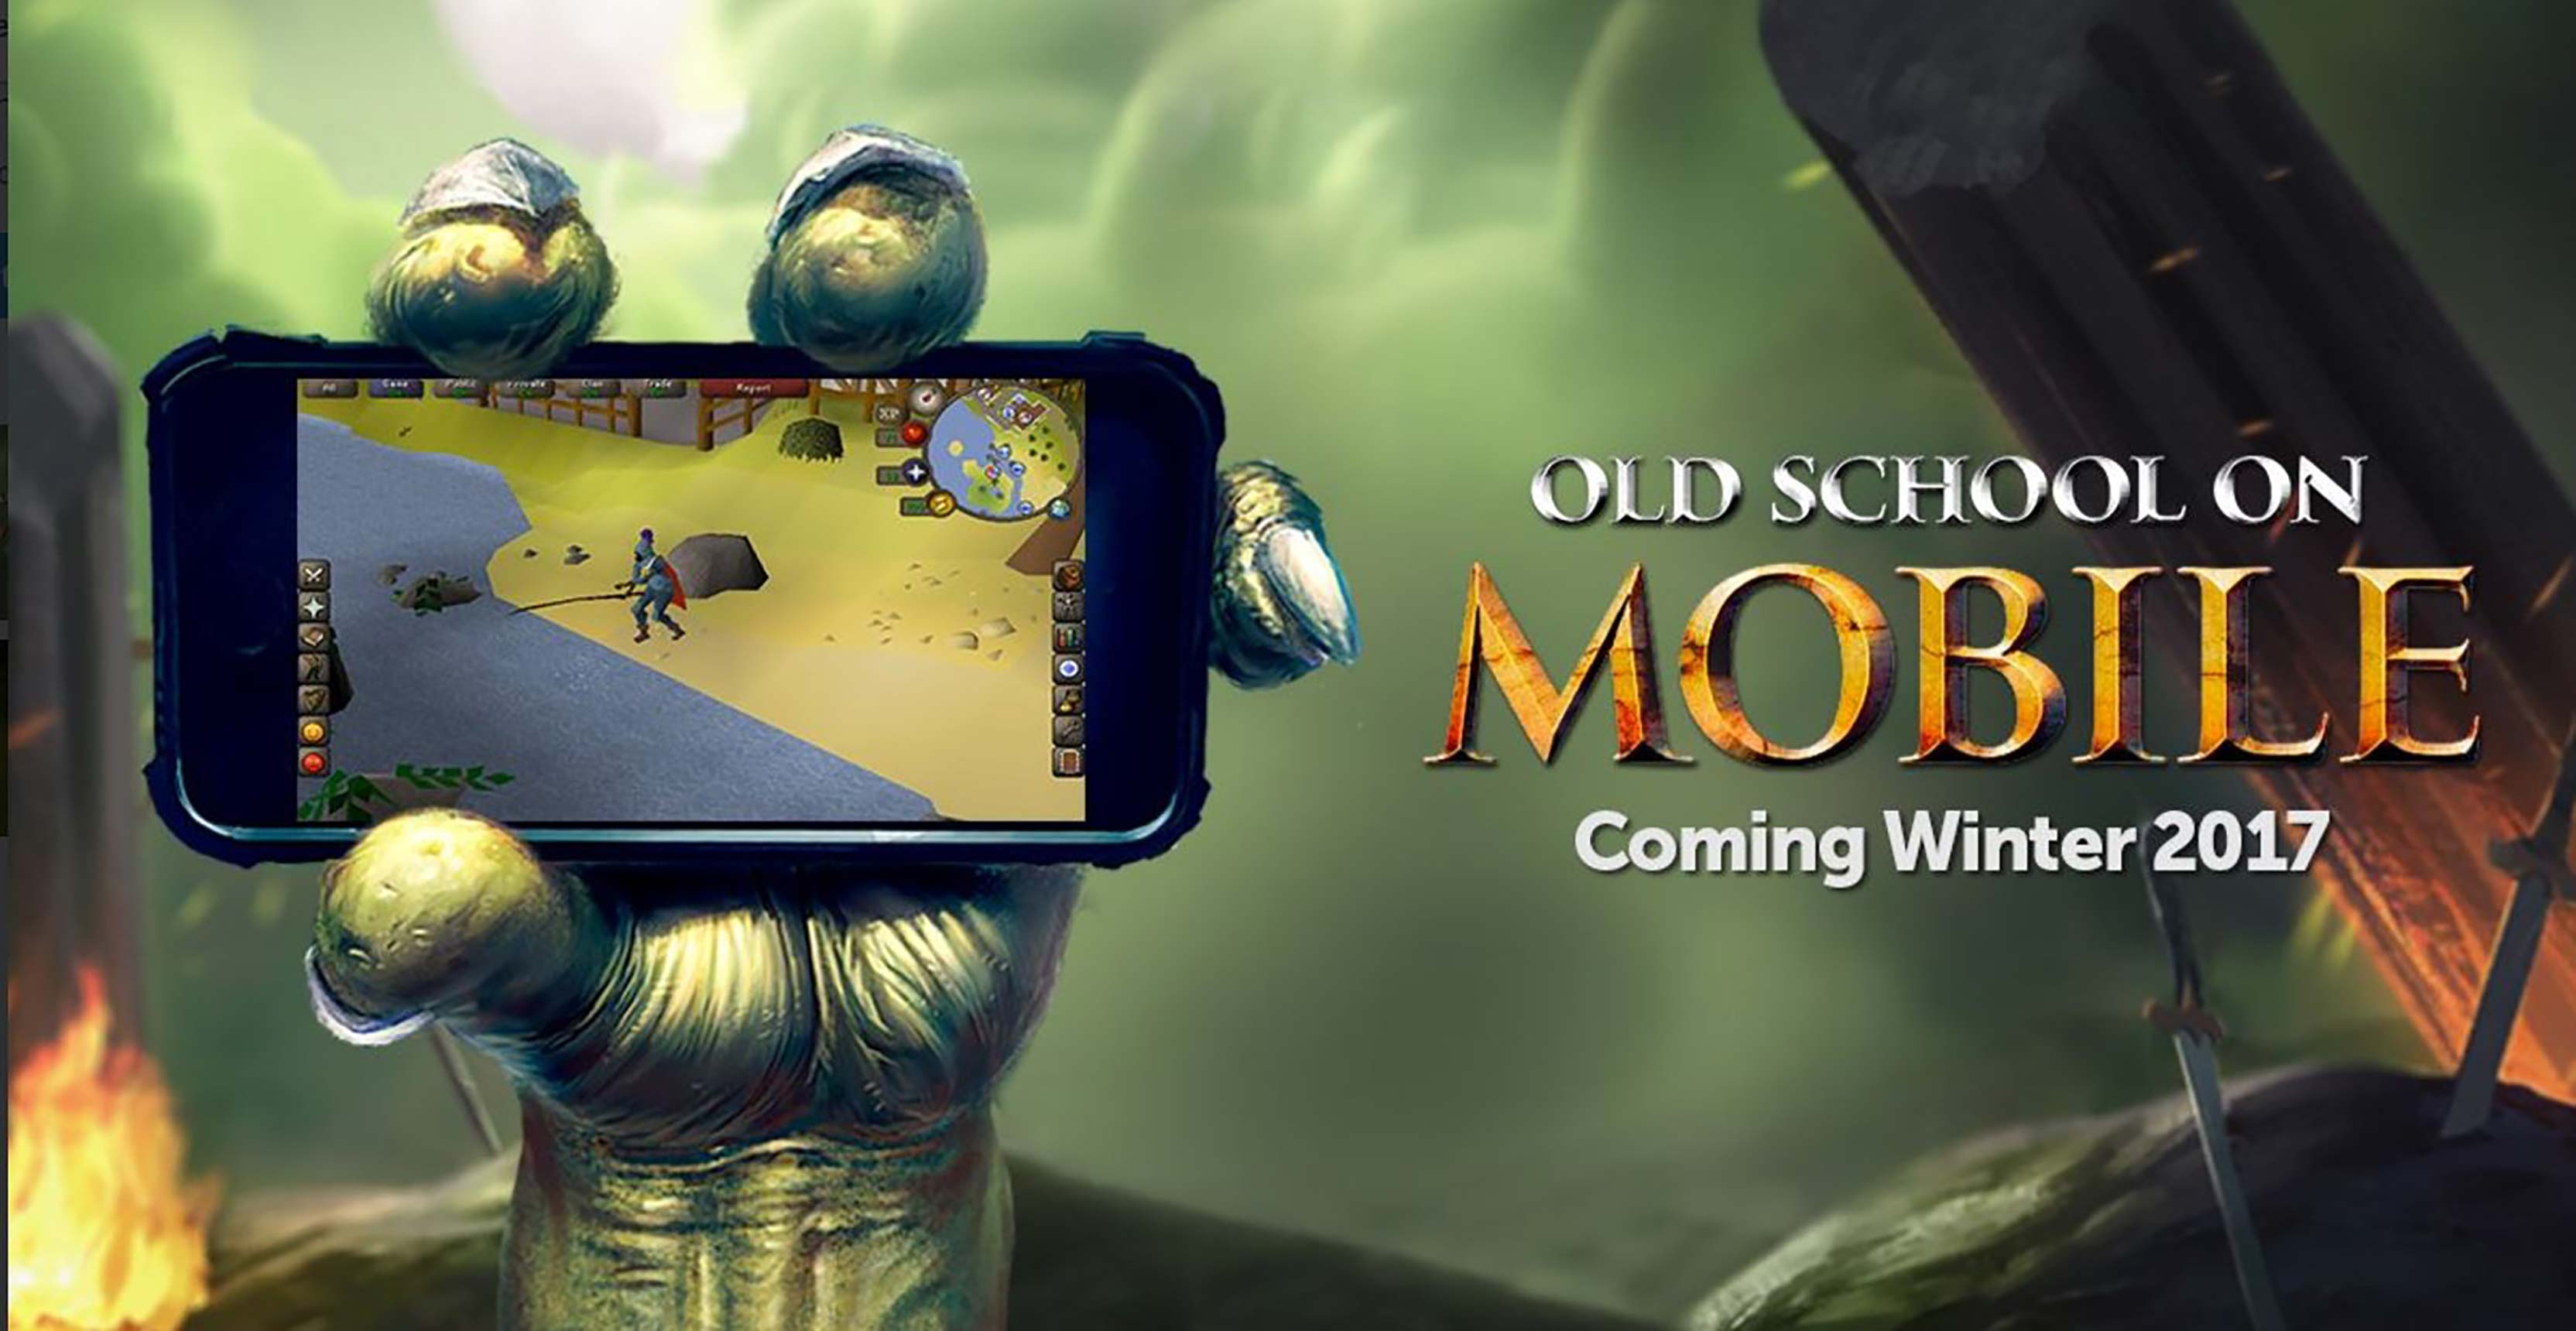 Legendary MMO RuneScape Mobile is finally here